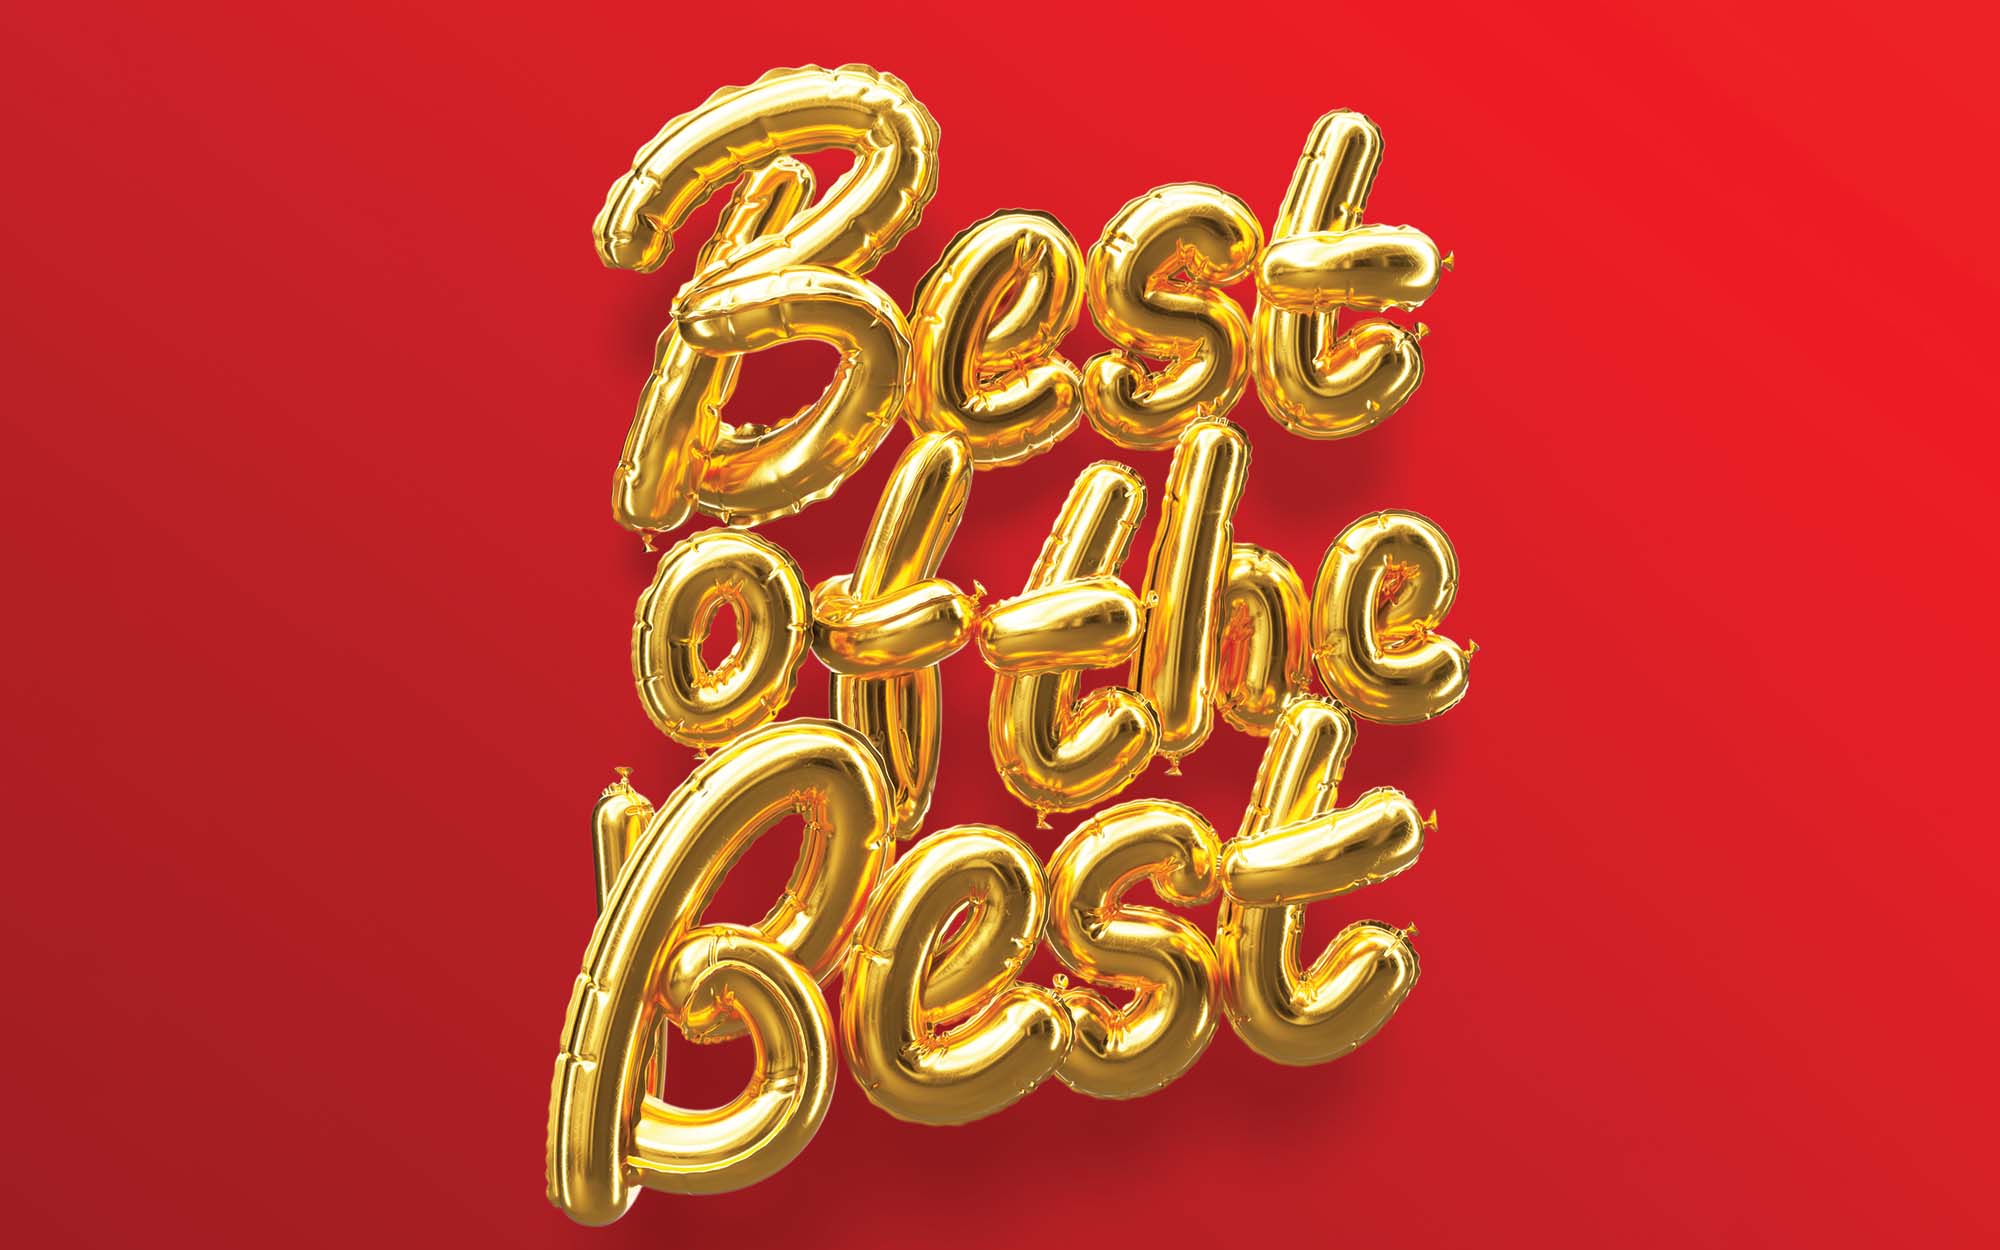 Best of the Best text treatment illustration